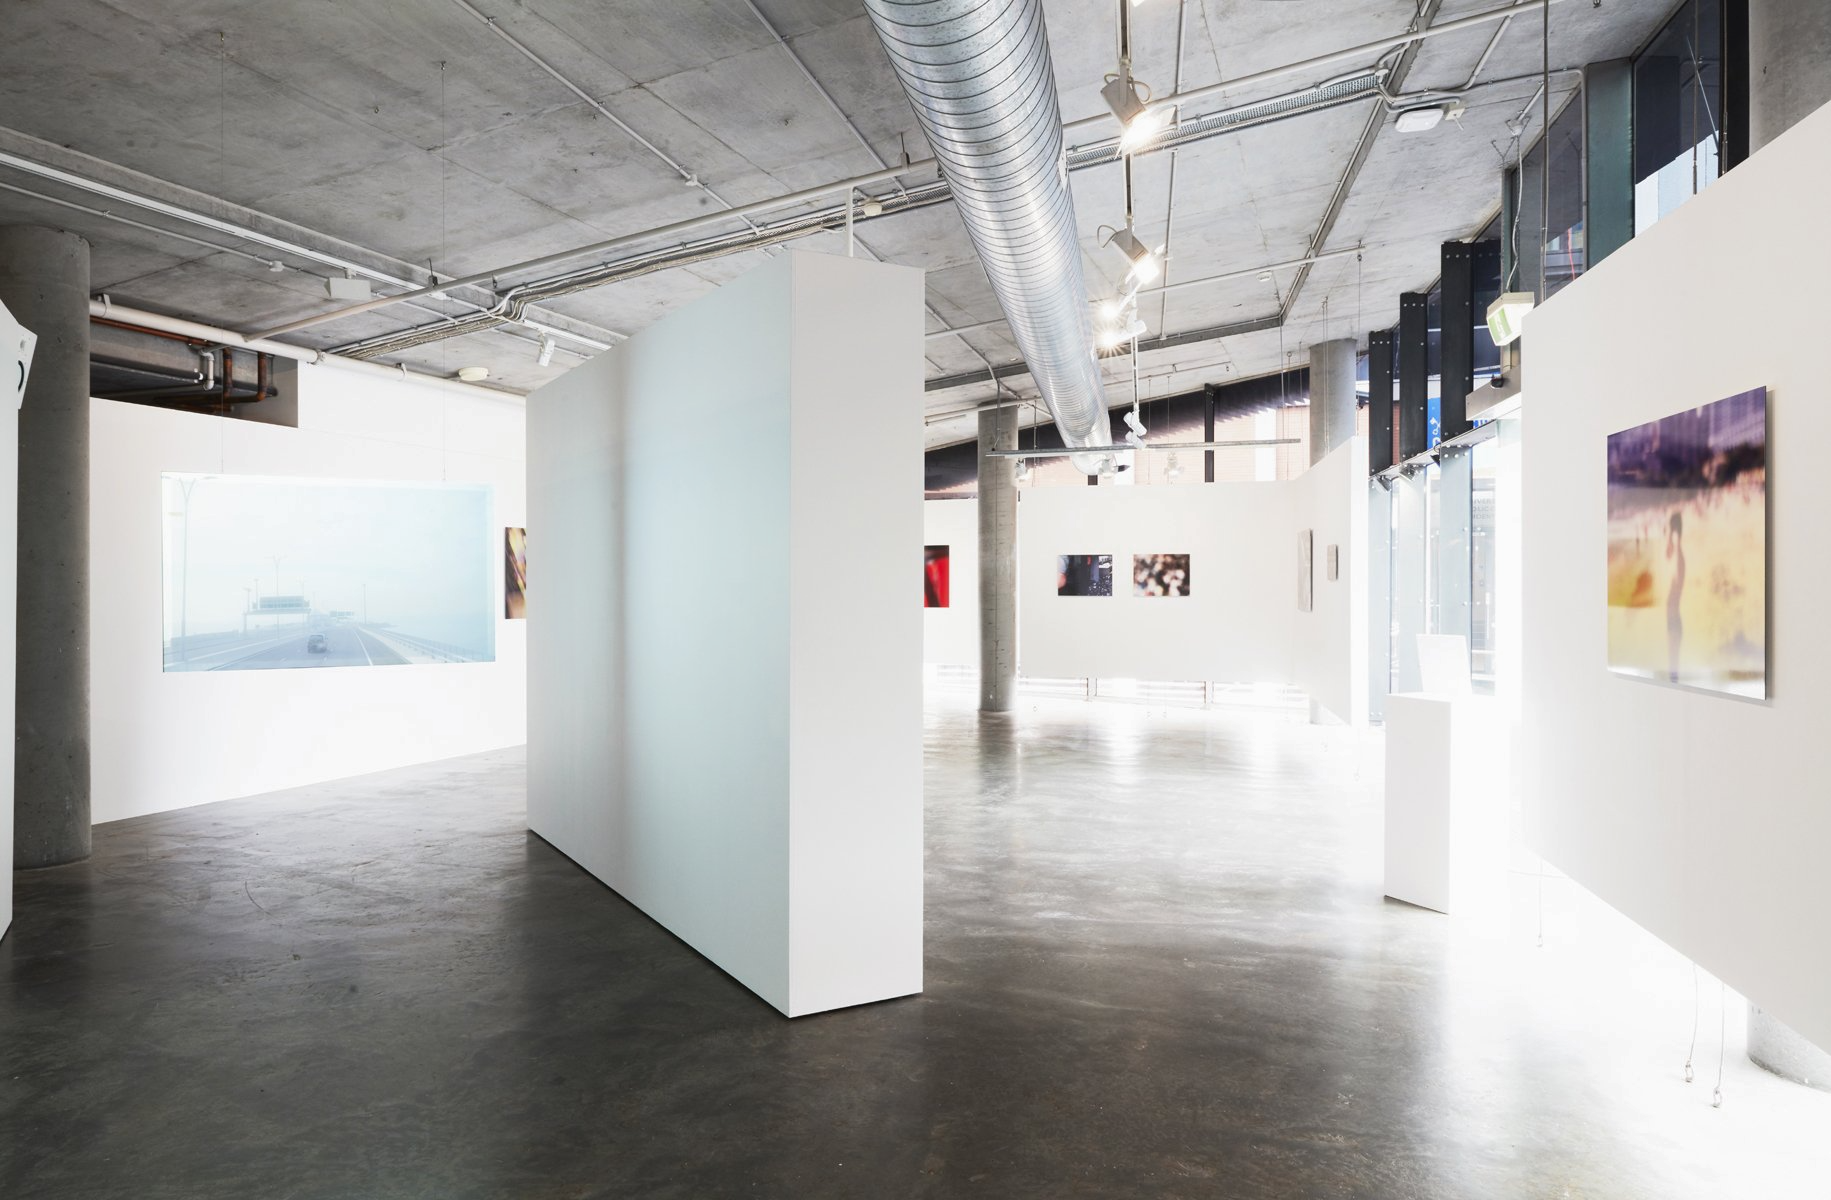 Installation view of Abridge at Verge Gallery. Courtesy Verge Gallery, photographed by Zan Wimberley.